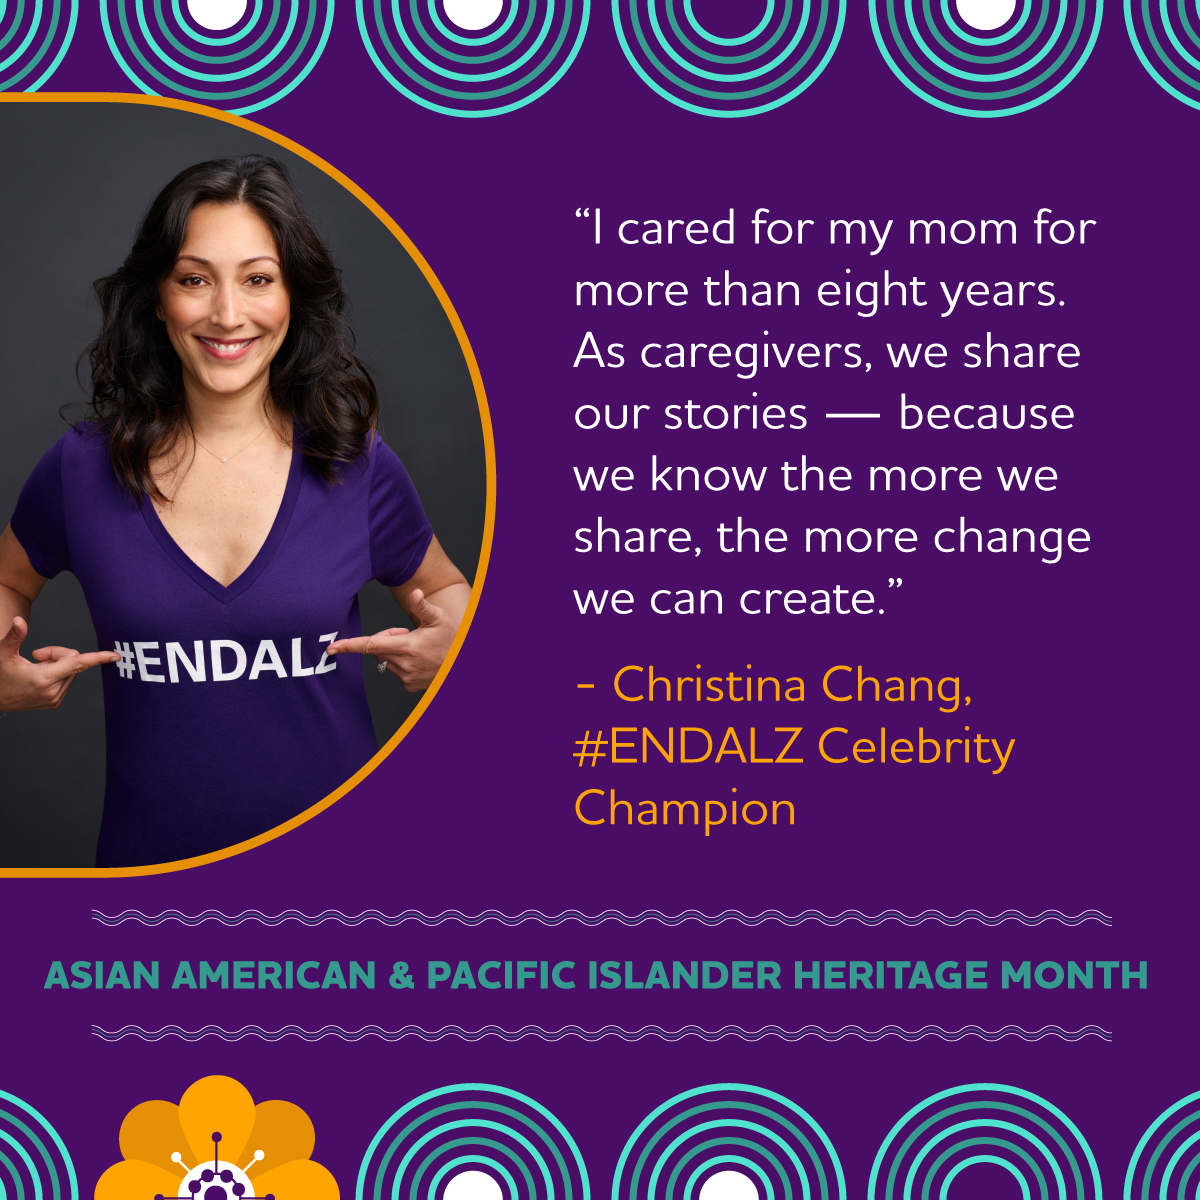 This month, we’re celebrating Asian Americans & Pacific Islanders, like actress and #ENDALZ Celebrity Champion @_ChristinaChang, passionate about raising Alzheimer’s awareness in honor of her mom and all those impacted. #AAPIMonth